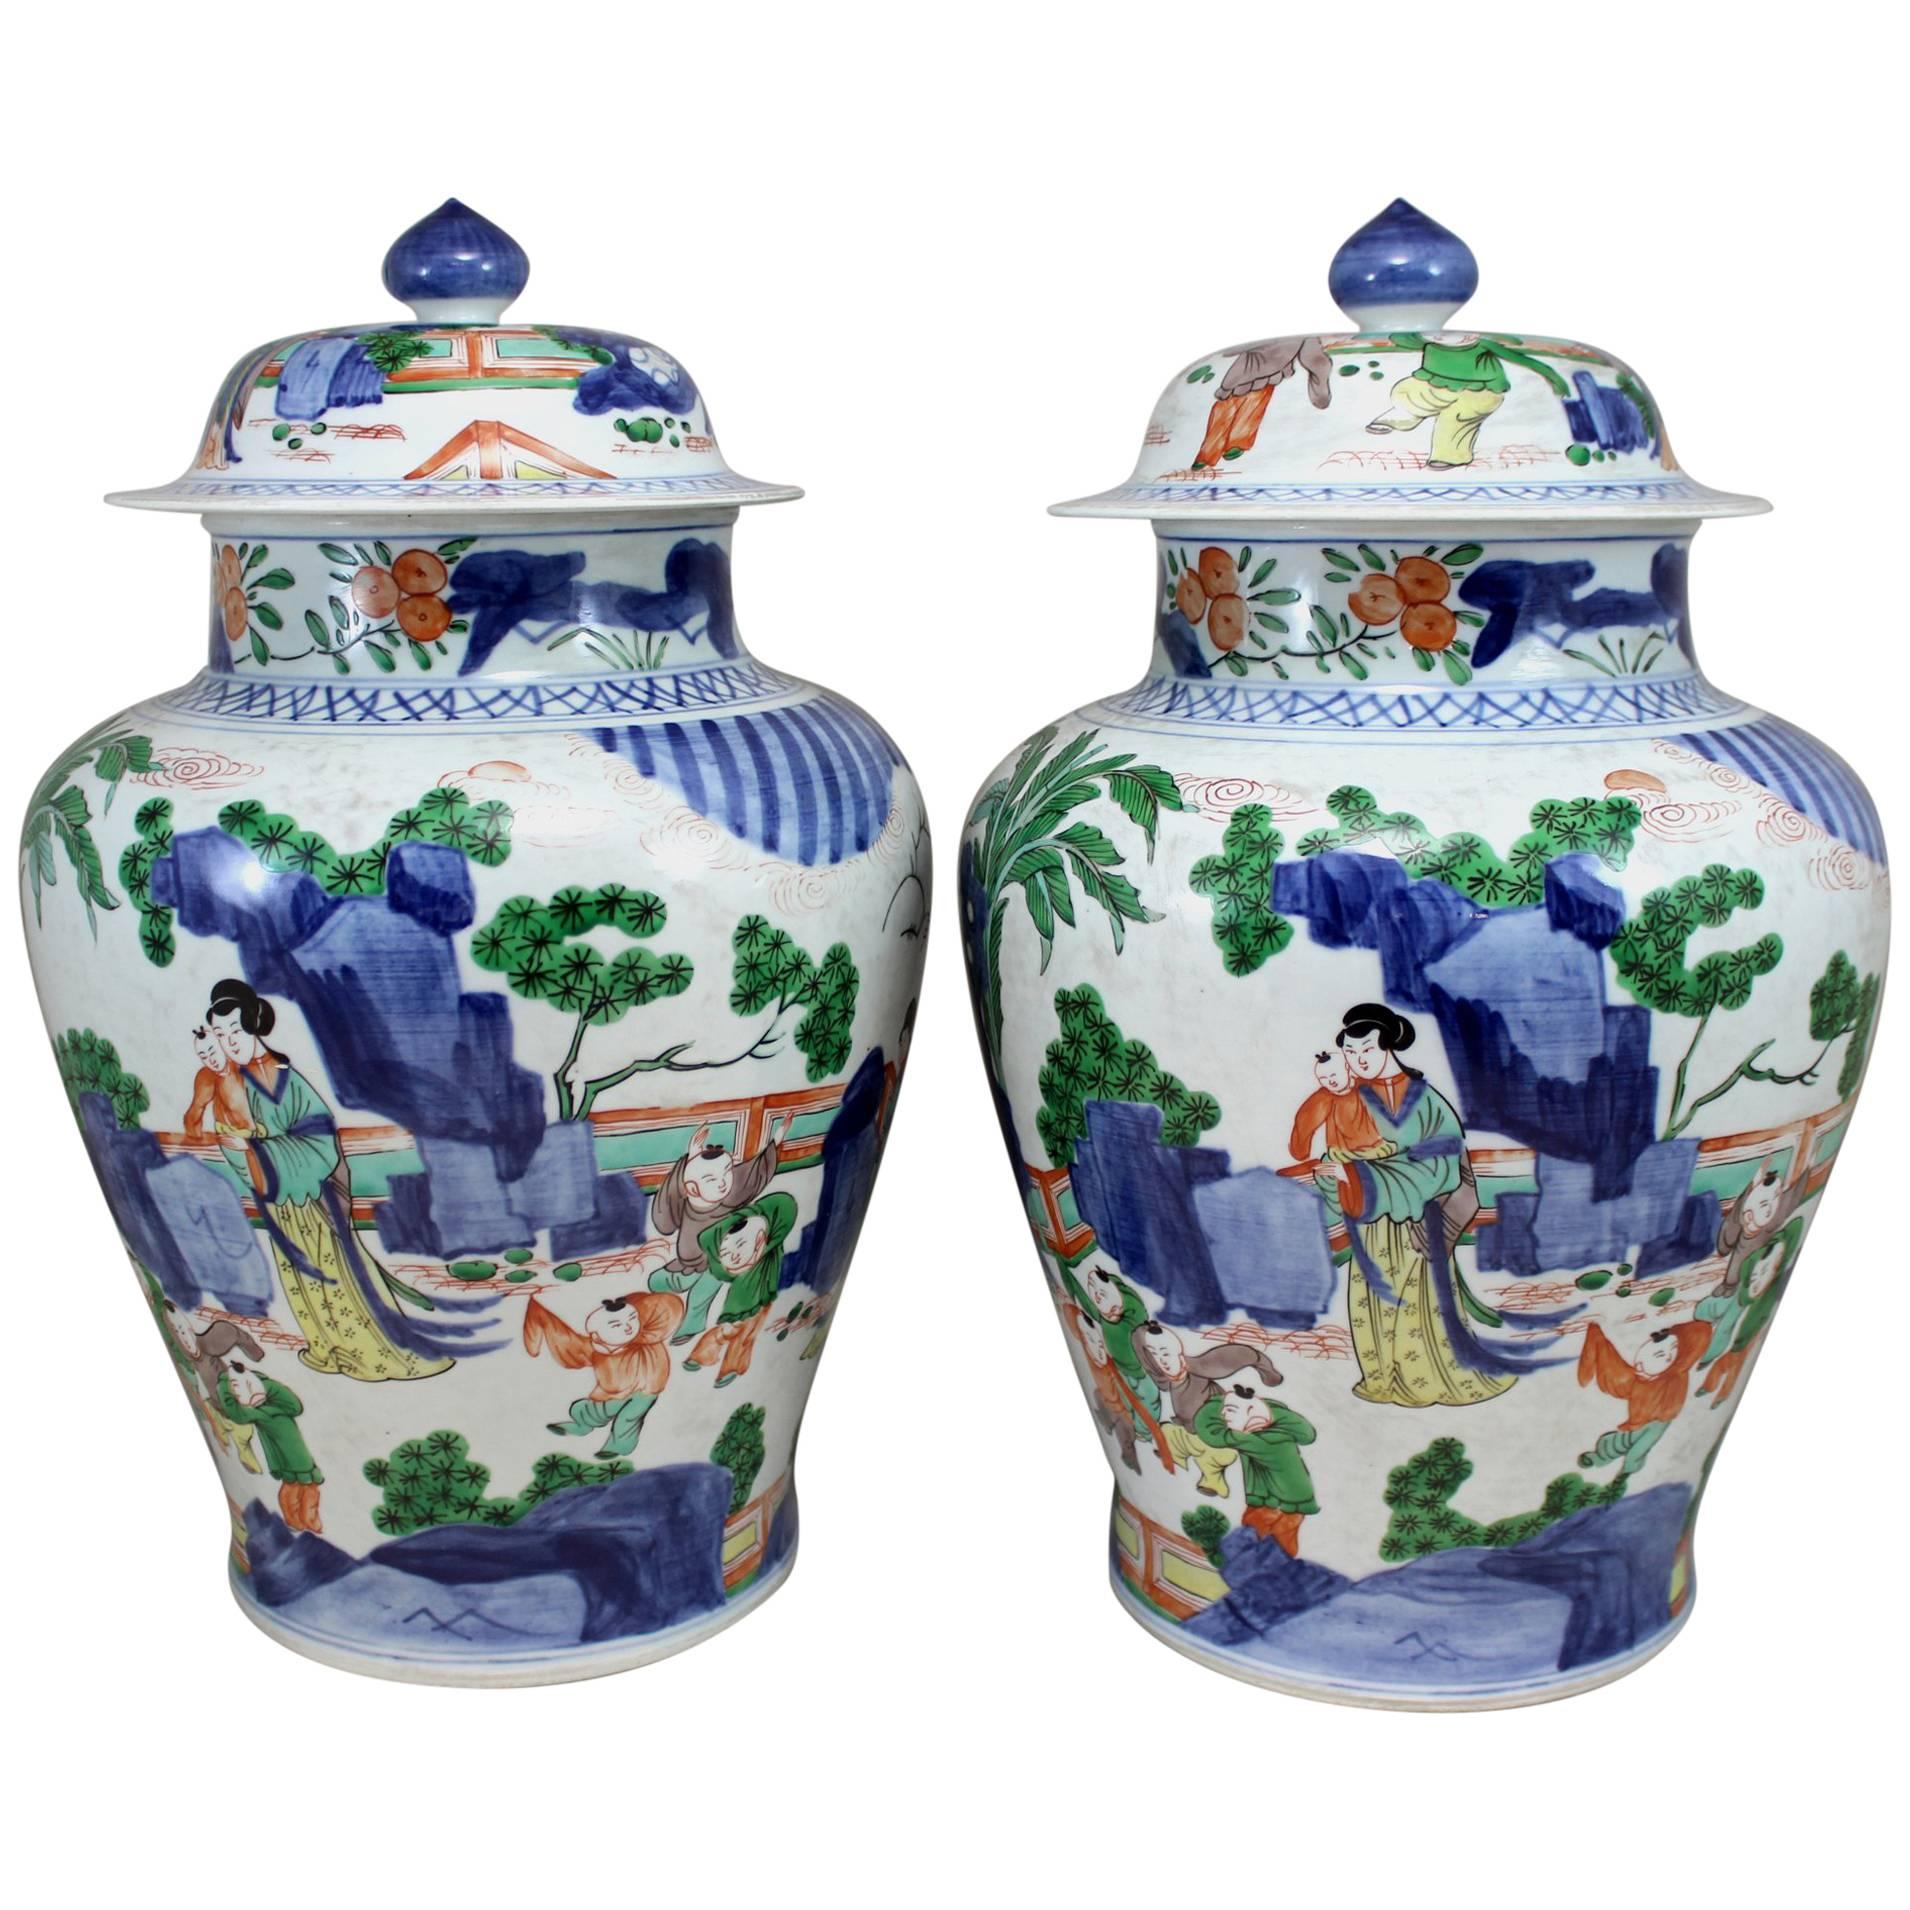 Pair of 19th Century Chinese Qing Dynasty Polychrome Covered Porcelain Jars